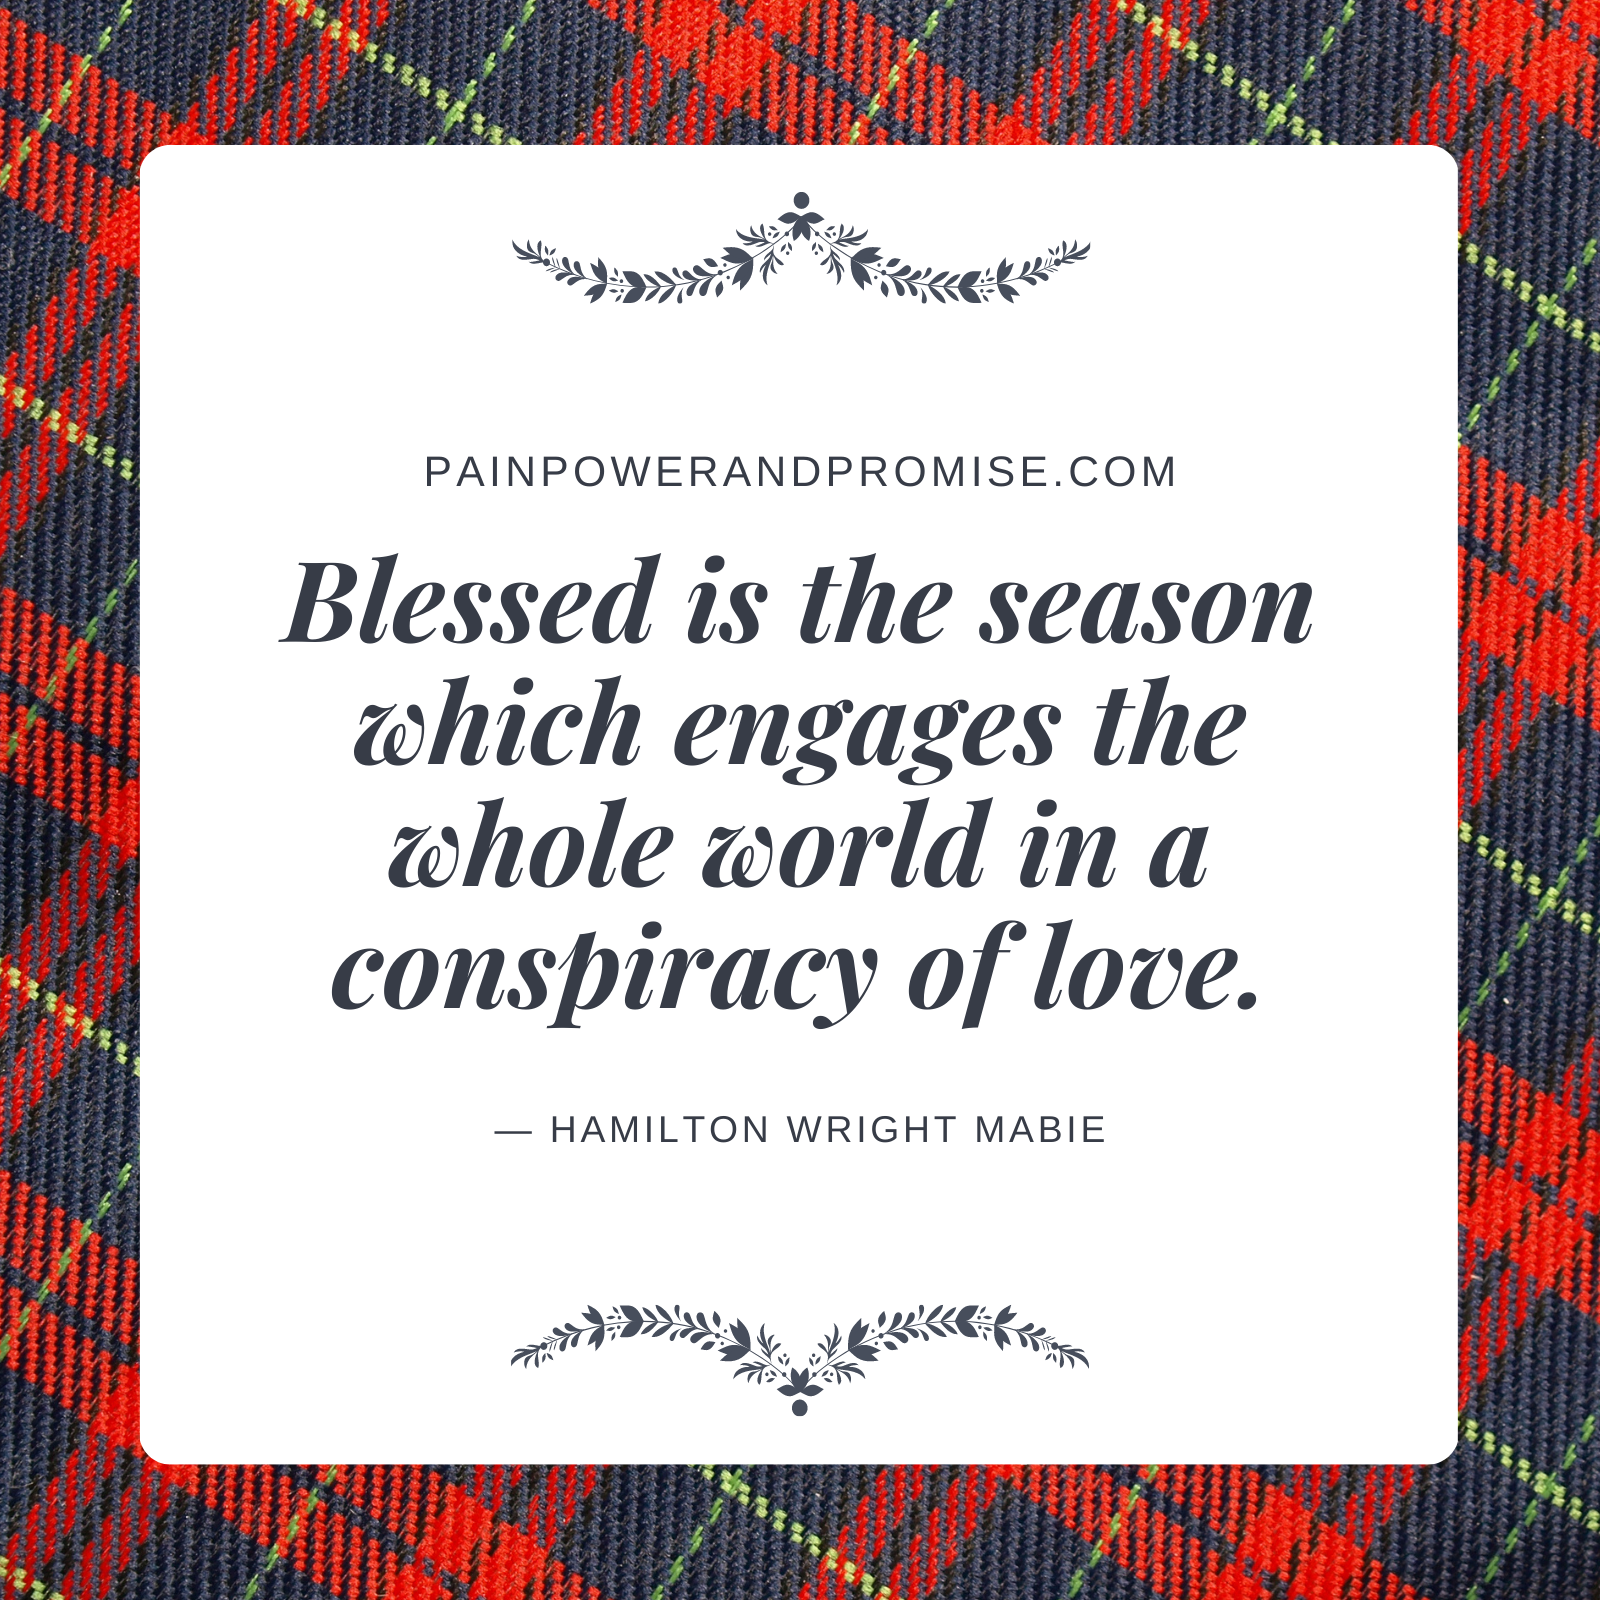 Inspirational Quote: Blessed is the season which engages the whole world in a conspiracy of love.